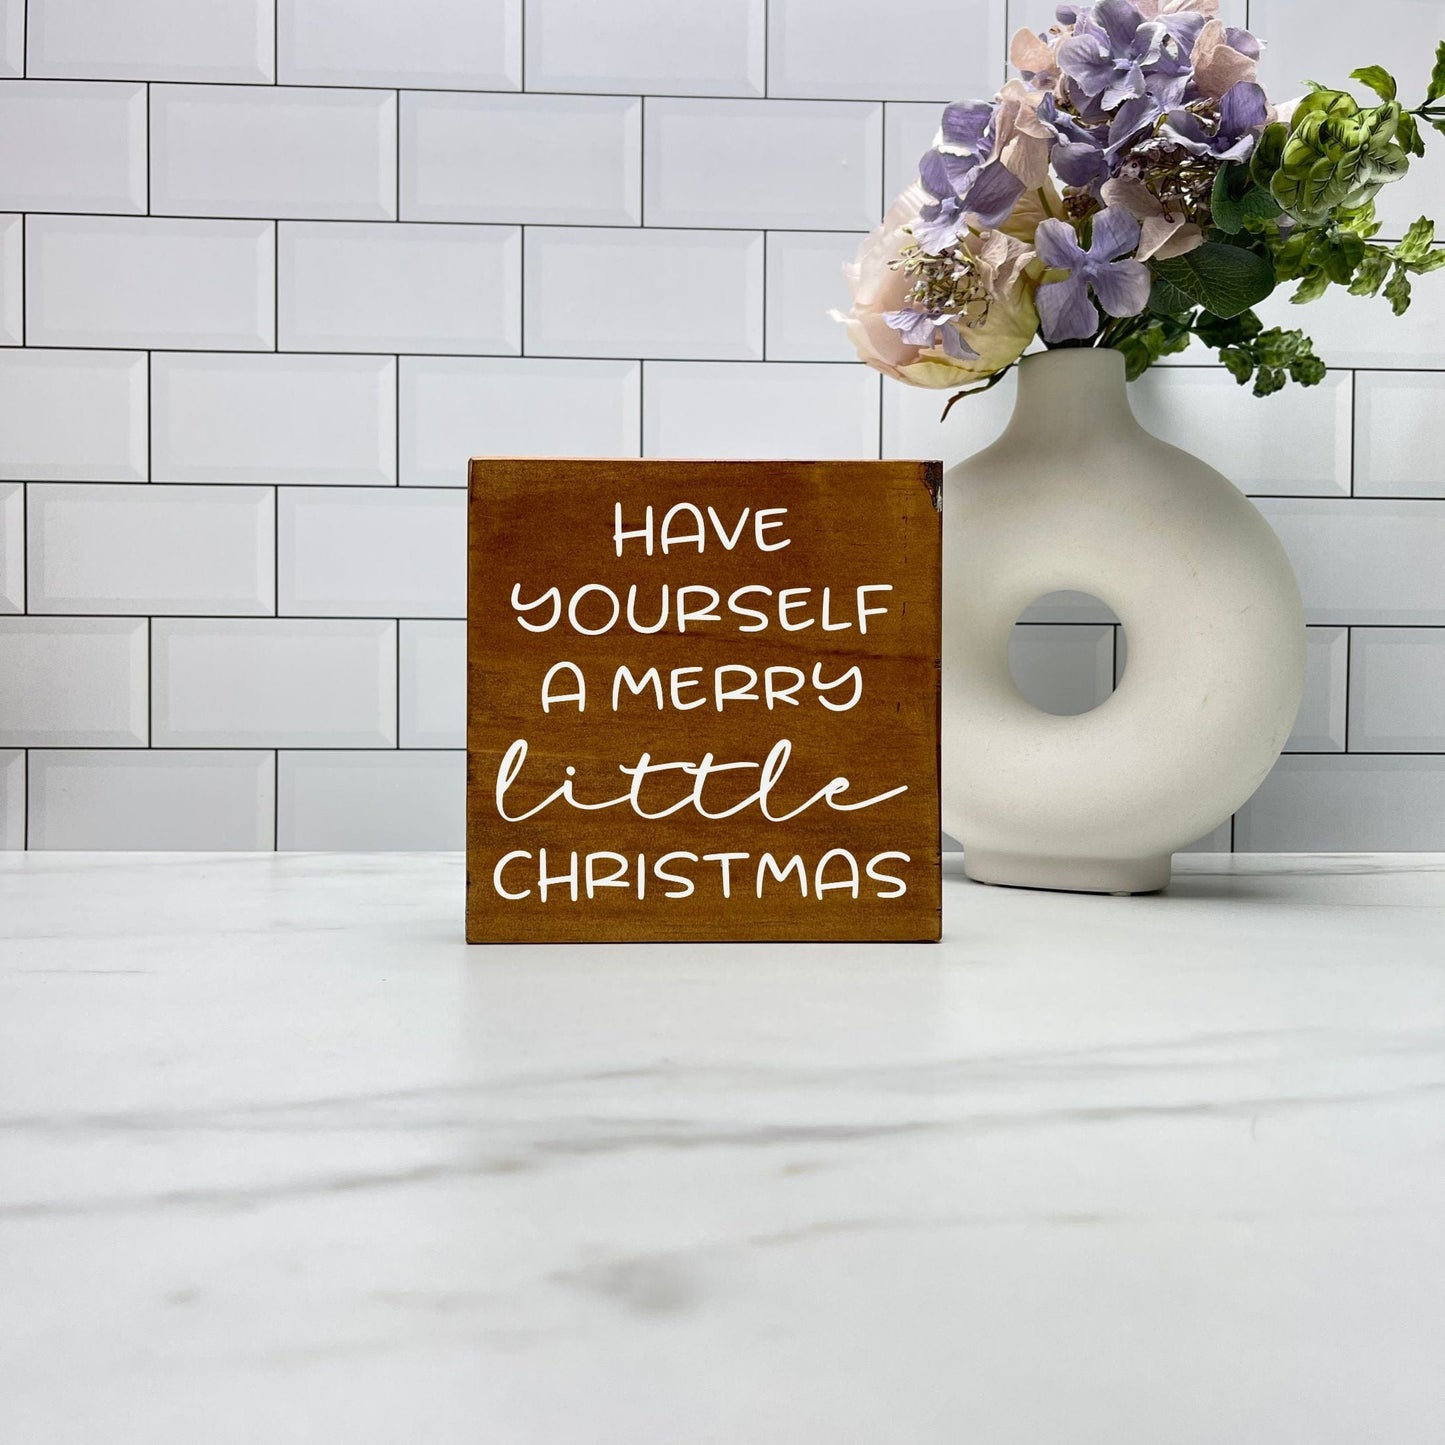 Have yourself a merry little Christmas sign, christmas wood signs, christmas decor, home decor